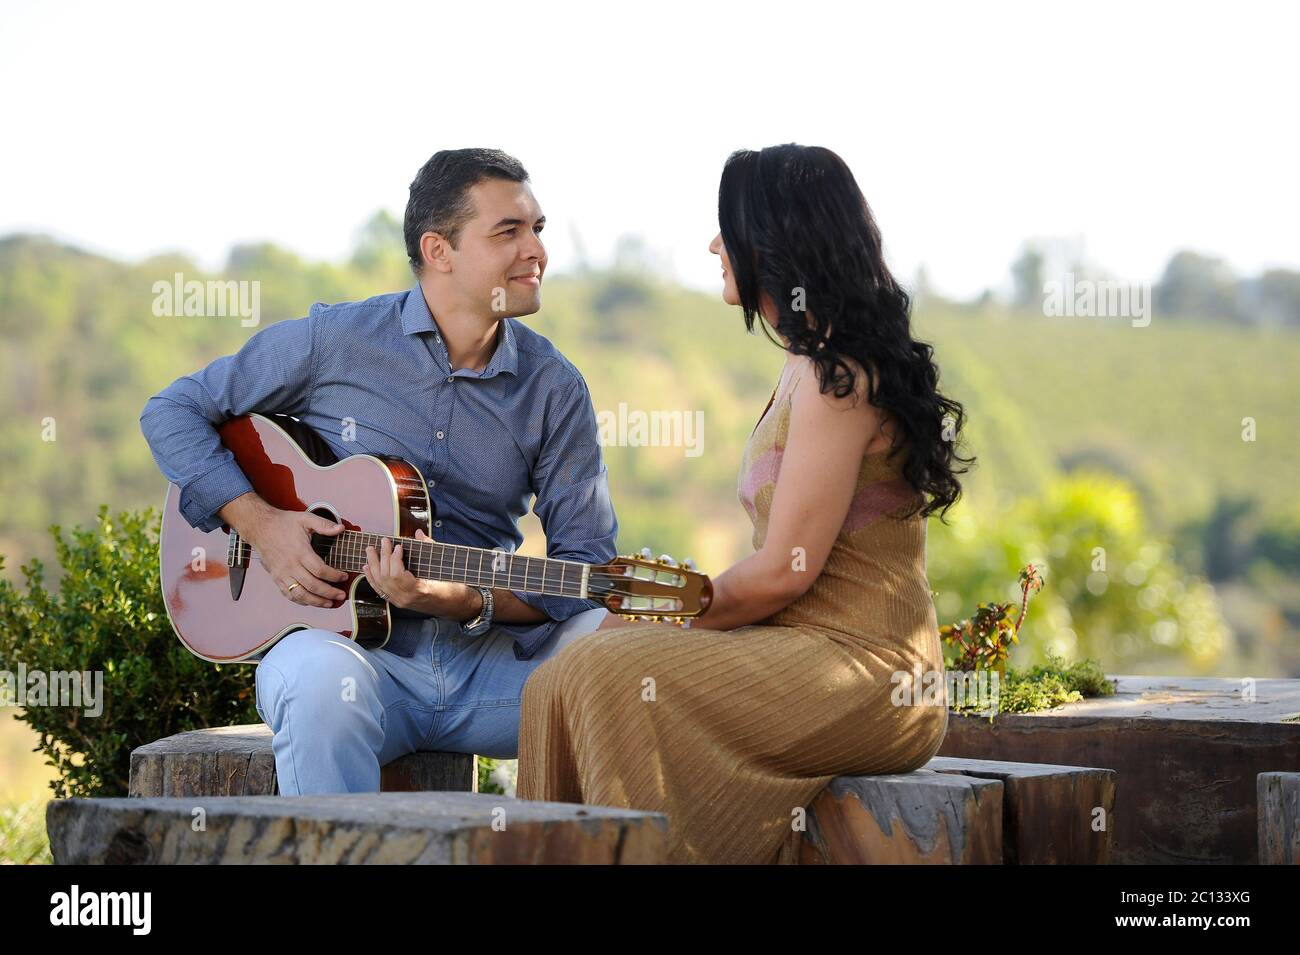 Reload Entertainment - You are the best one of the best ones💯 . . .  #prewedding #preweddingshoot #coupleposes #couplegoals #romantic #guitar  #soulmates #bangalore #india #reloadentertainment #elements | Facebook